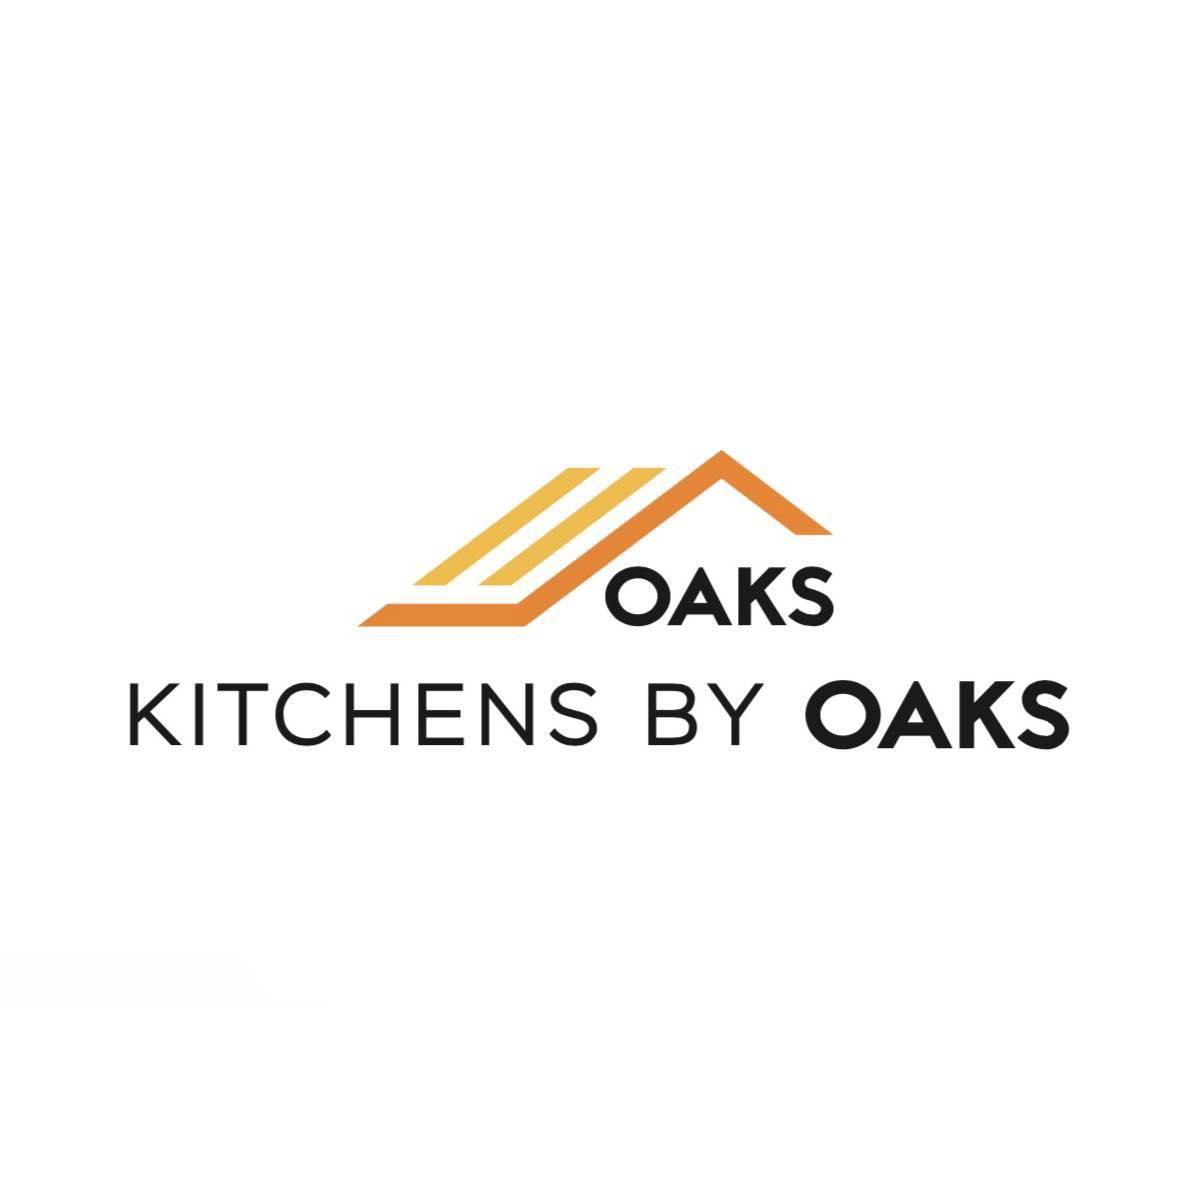 Kitchens by Oaks - Webster, NY 14580 - (585)349-8100 | ShowMeLocal.com